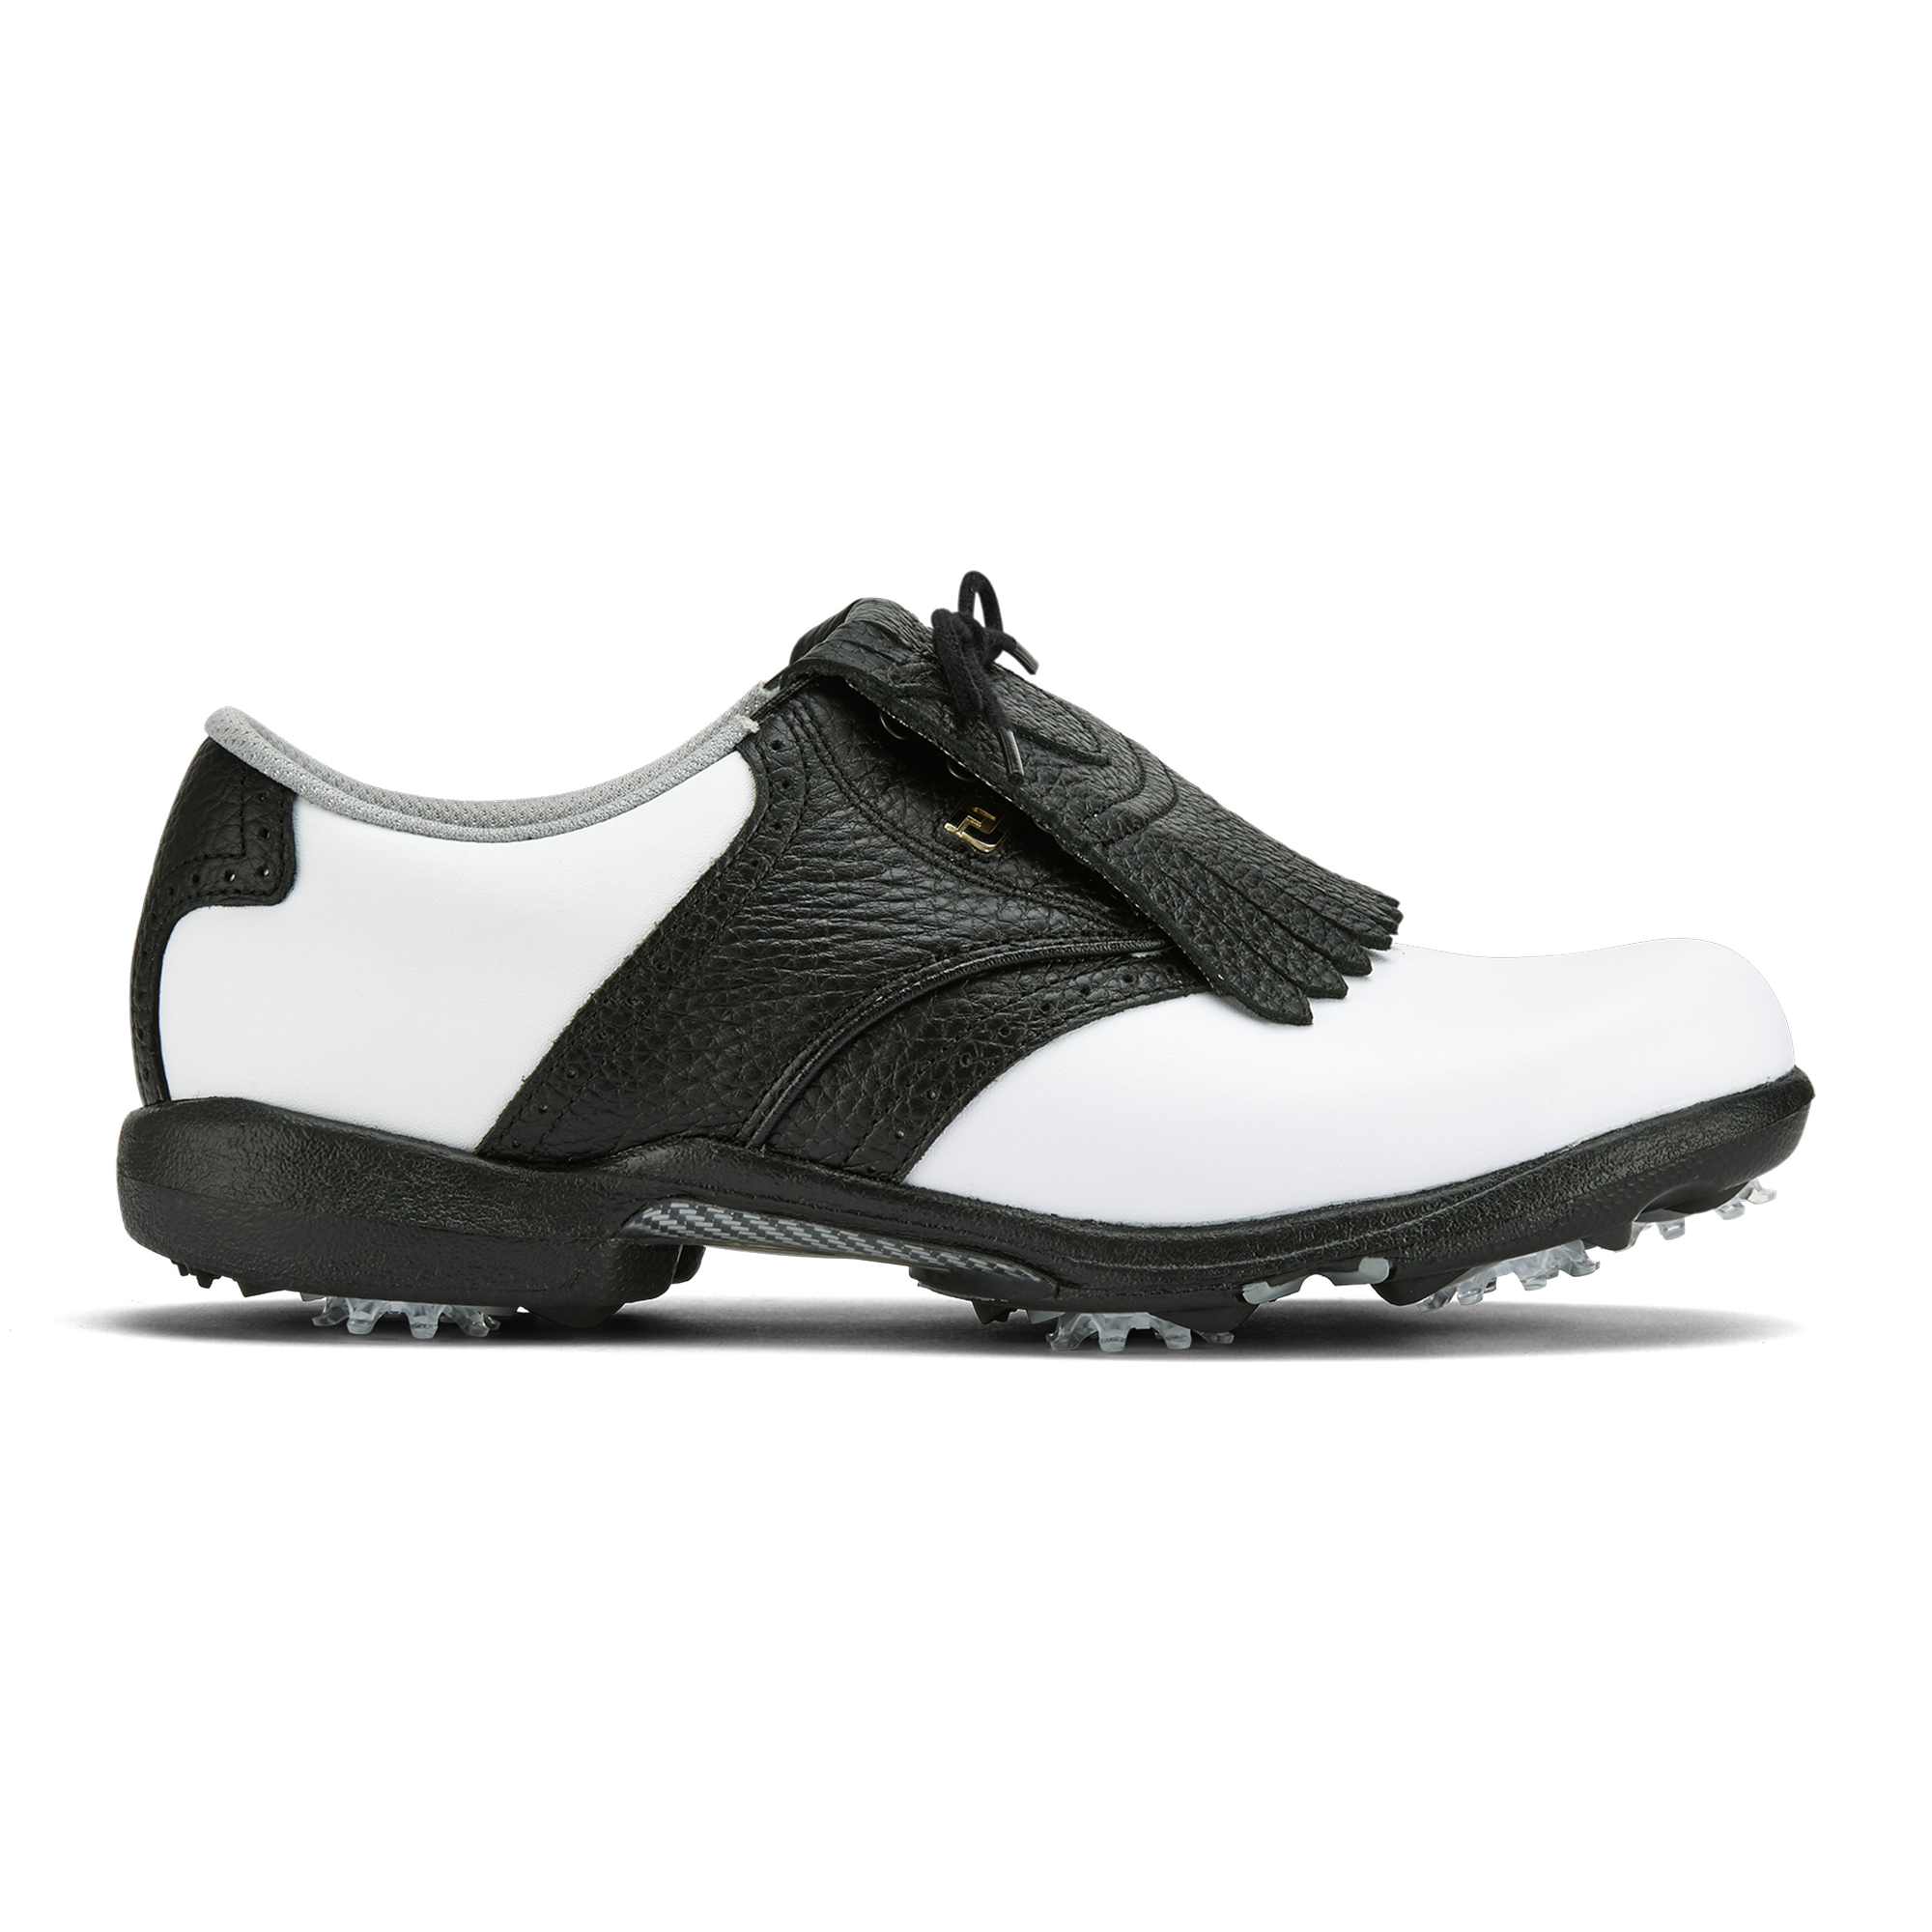 womens golf shoes with kilties